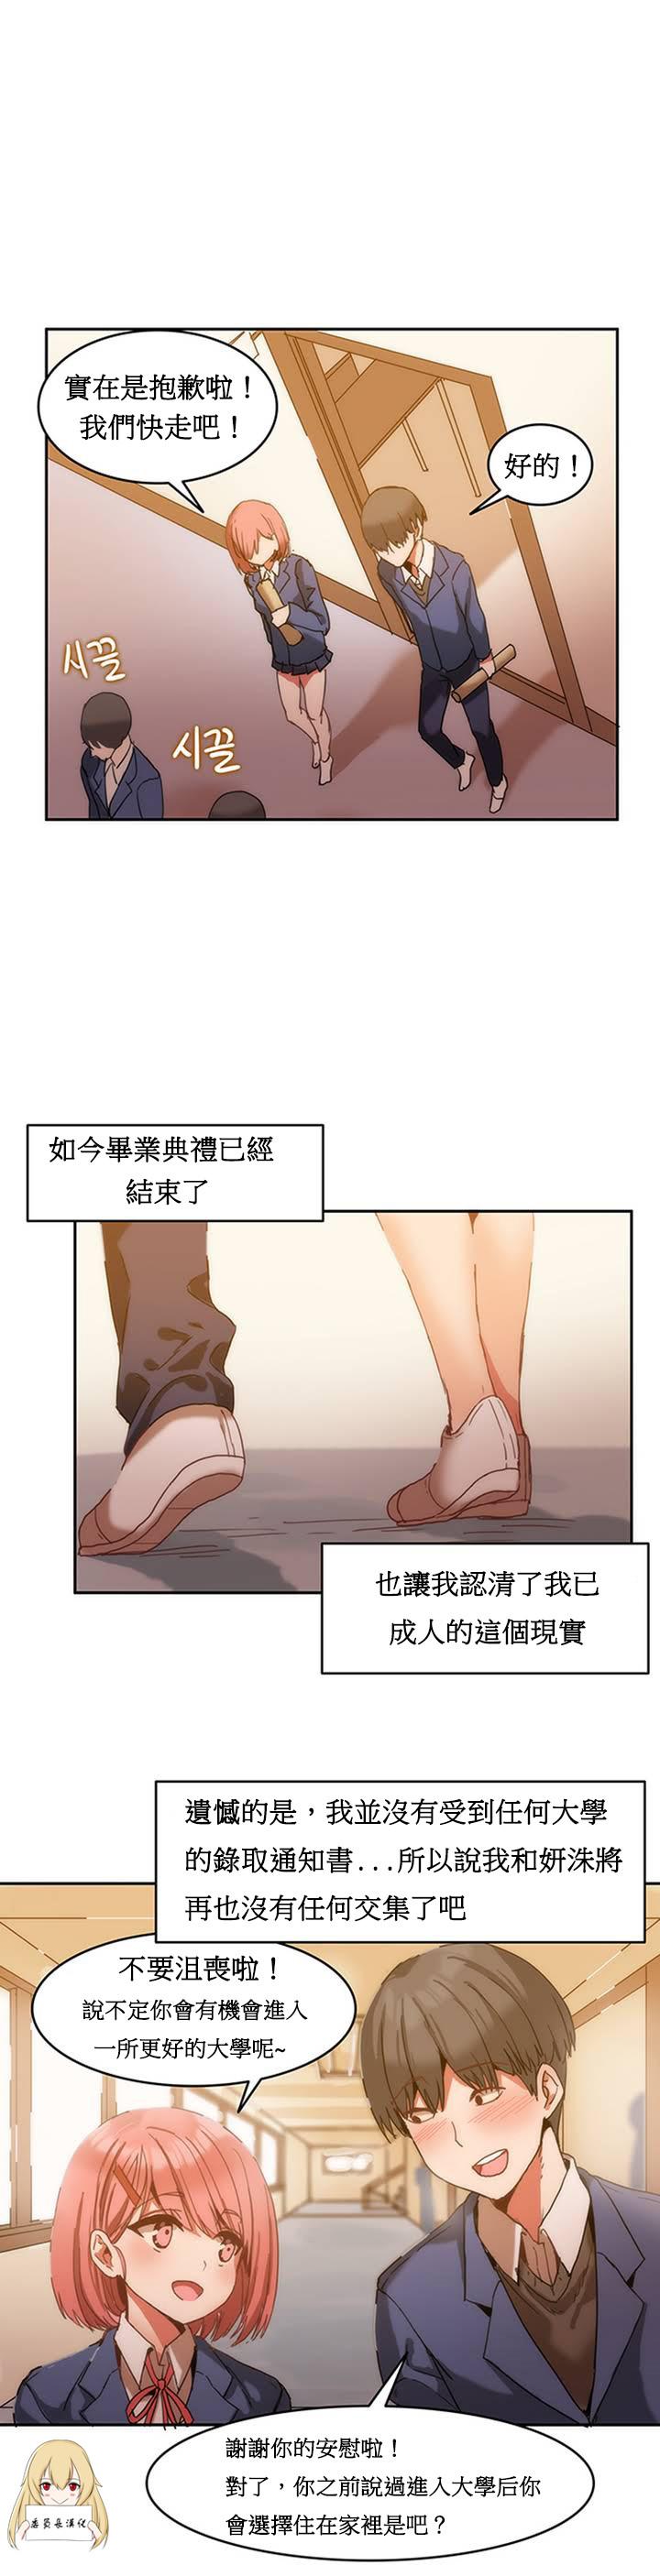 Fucked Hahri's Lumpy Boardhouse Ch. 0~24【委員長個人漢化】（持續更新） Her - Page 6